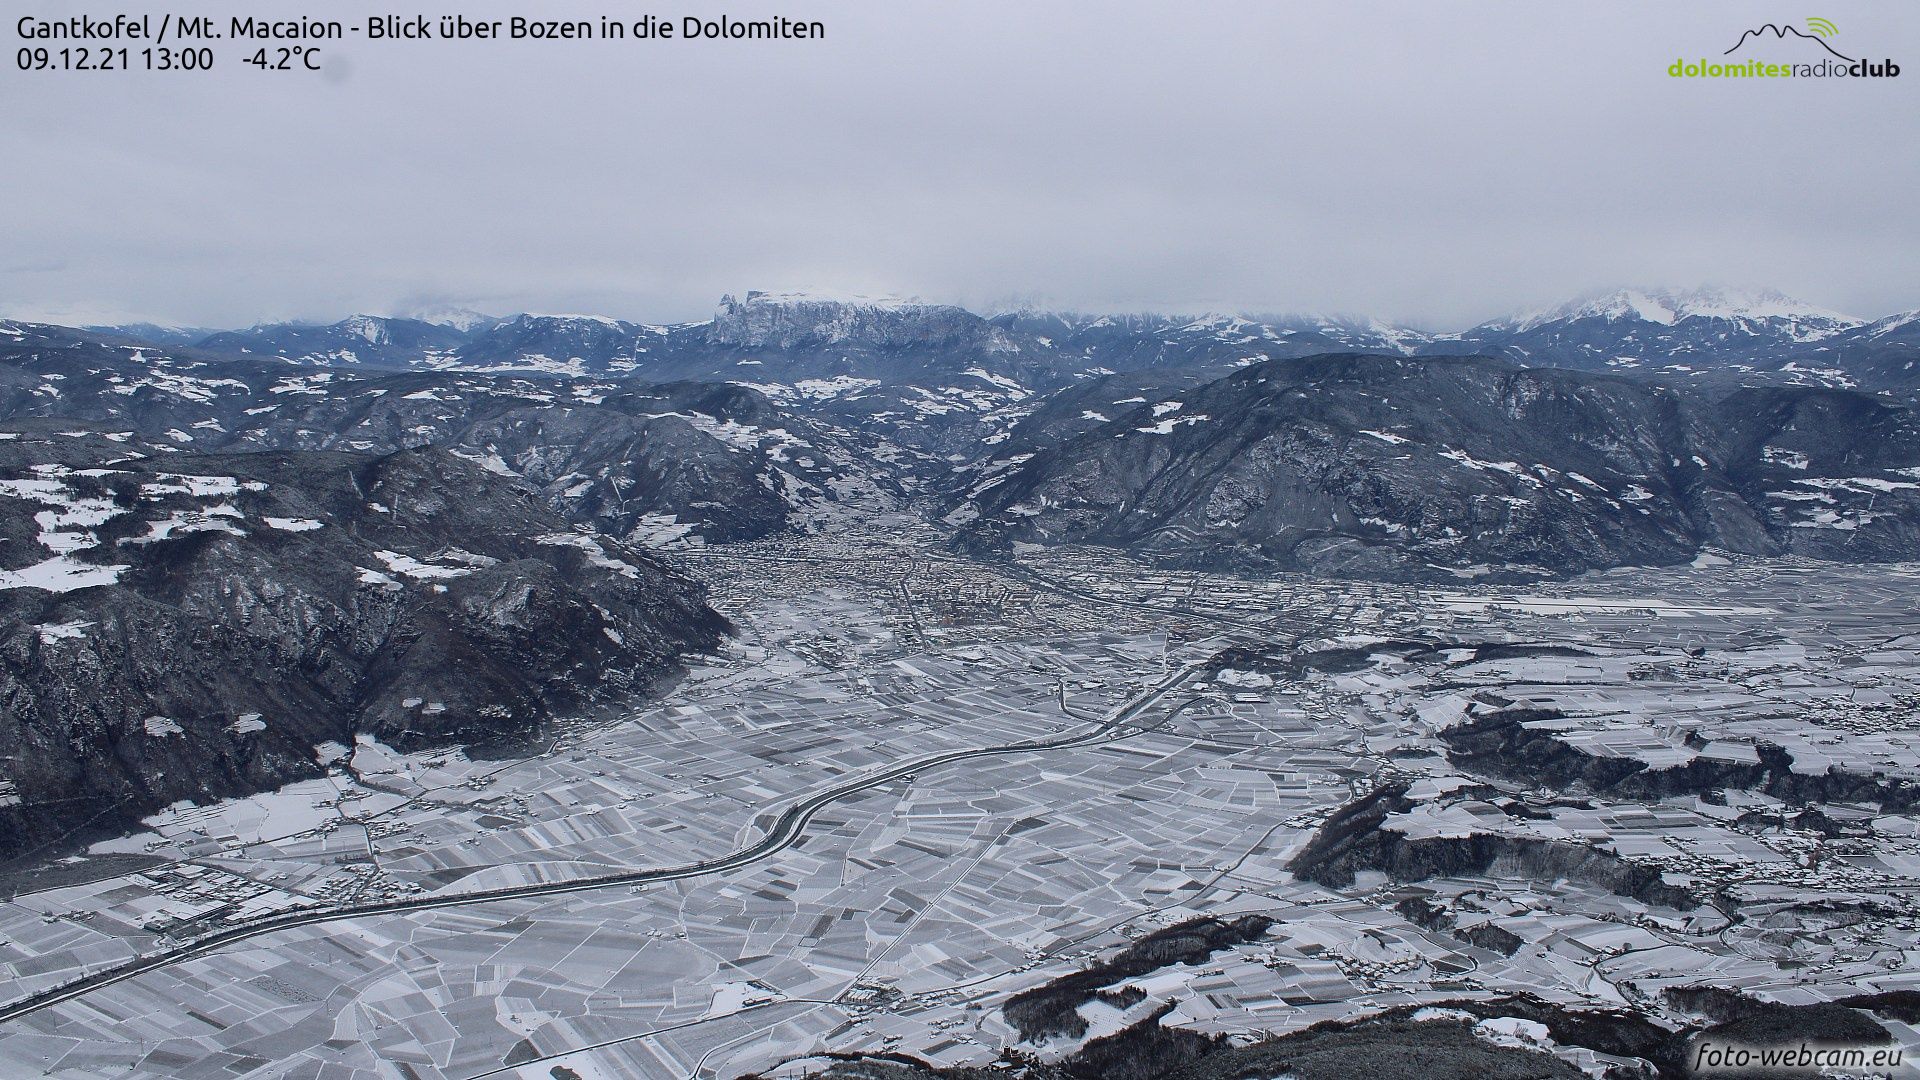 Snow all the way down to Bozen in the Southern Alps (foto-webcam.eu)